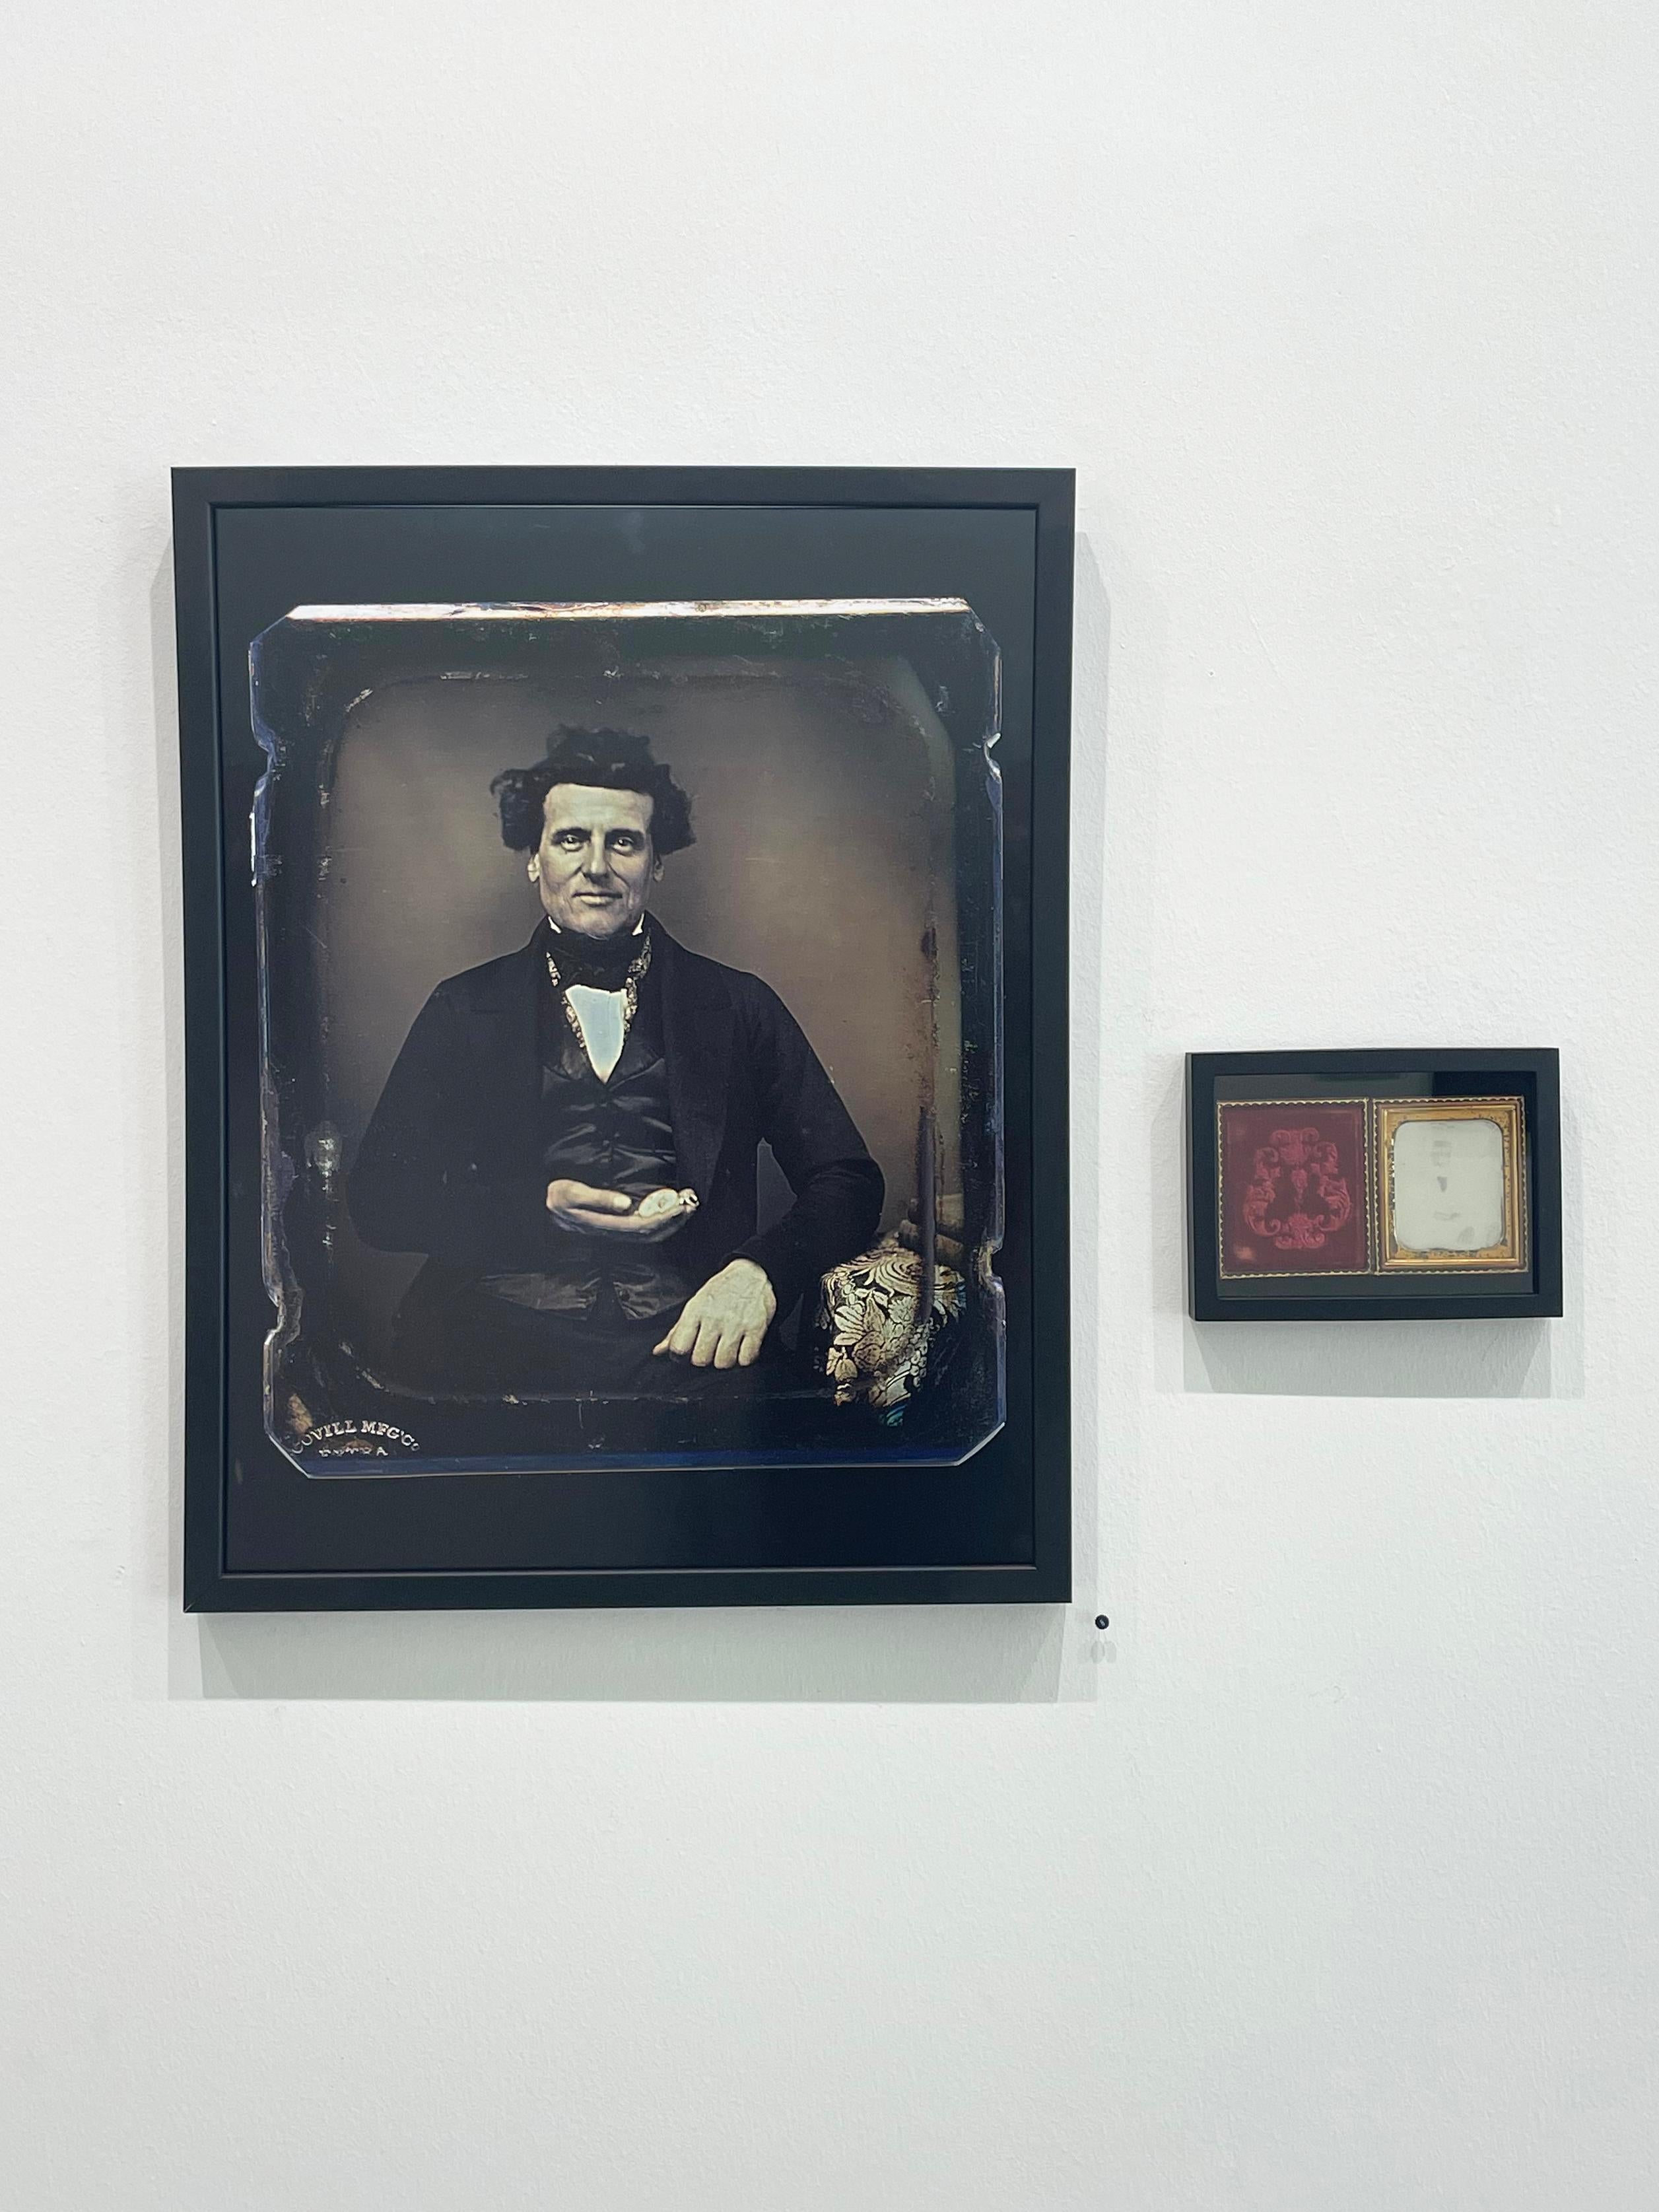 *Listing includes framed archival pigment print and daguerreotype

Man with Pocket Watch by Thomas Kennaugh is an enlarged and enhanced print of a daguerreotype made in 1855. The original daguerreotype measures approximately 3.5 x 3 inches, and is